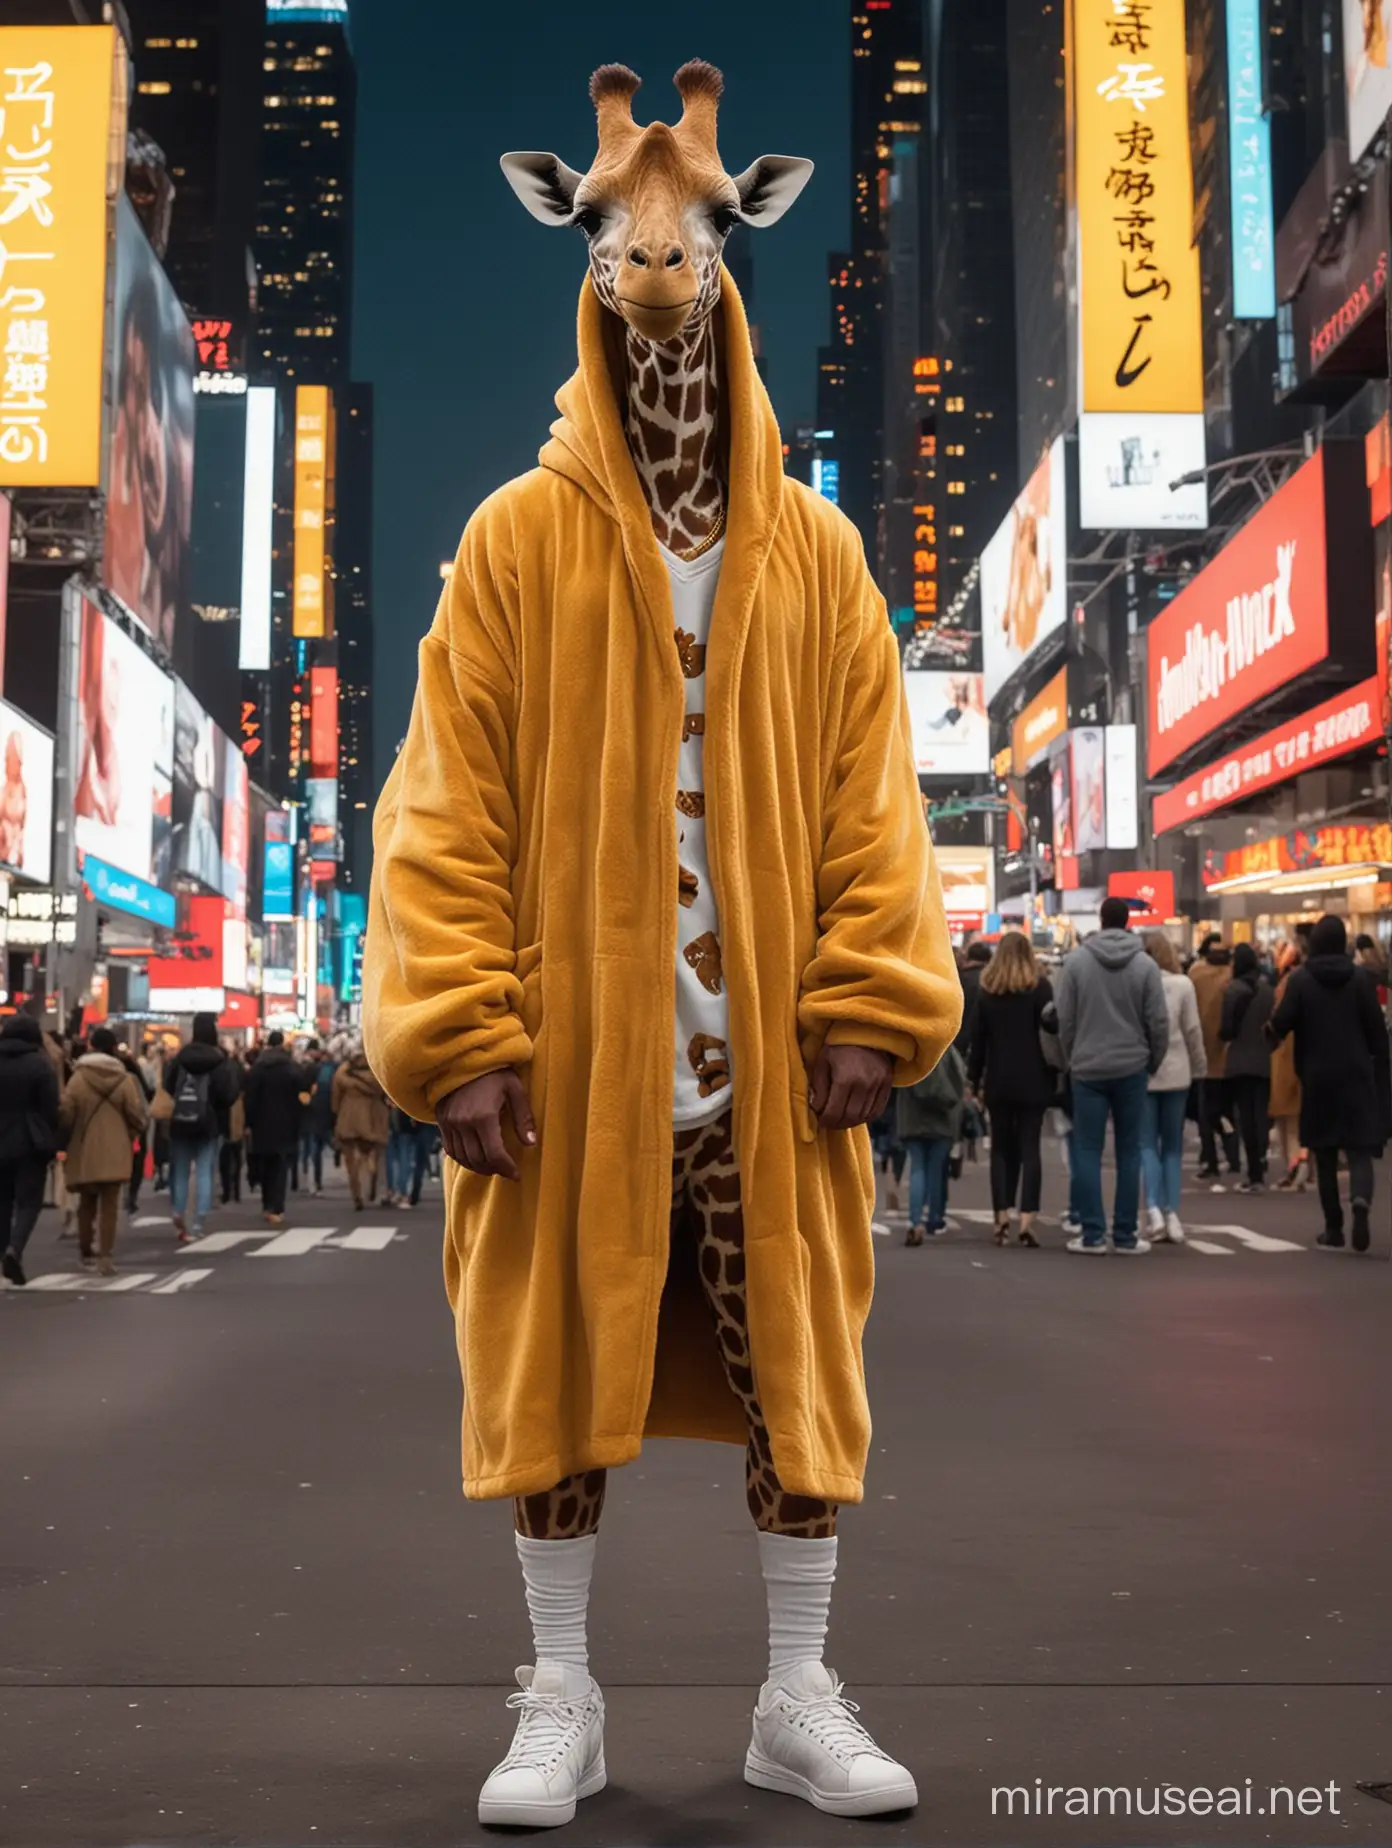 Creates a visual representation of a character that appears to be a giraffe, with predominantly human physical characteristics but an outward appearance of a giraffe.

The character must be in a squatting position, with a style that evokes the world of rap.

The clothing should consist of a mustard-colored bathrobe, with a hood decorated with a chiporro edge or brown plush fabric, as well as the ends of the sleeves. The character's short hair should also have a design that simulates the fur of a giraffe.

The character's face must be completely giraffe-like, with refined features and a masculine appearance. However, the body must have the bone structure of a human being, including human arms, legs, hands, and feet.

The character must wear white sneakers and the visual representation as a whole must be hyper-realistic, so that at first glance it is clearly perceived as a humanoid panther in posture and with the aforementioned characteristics.

The character must be in Times Square in New York at night with neon lights in the background.